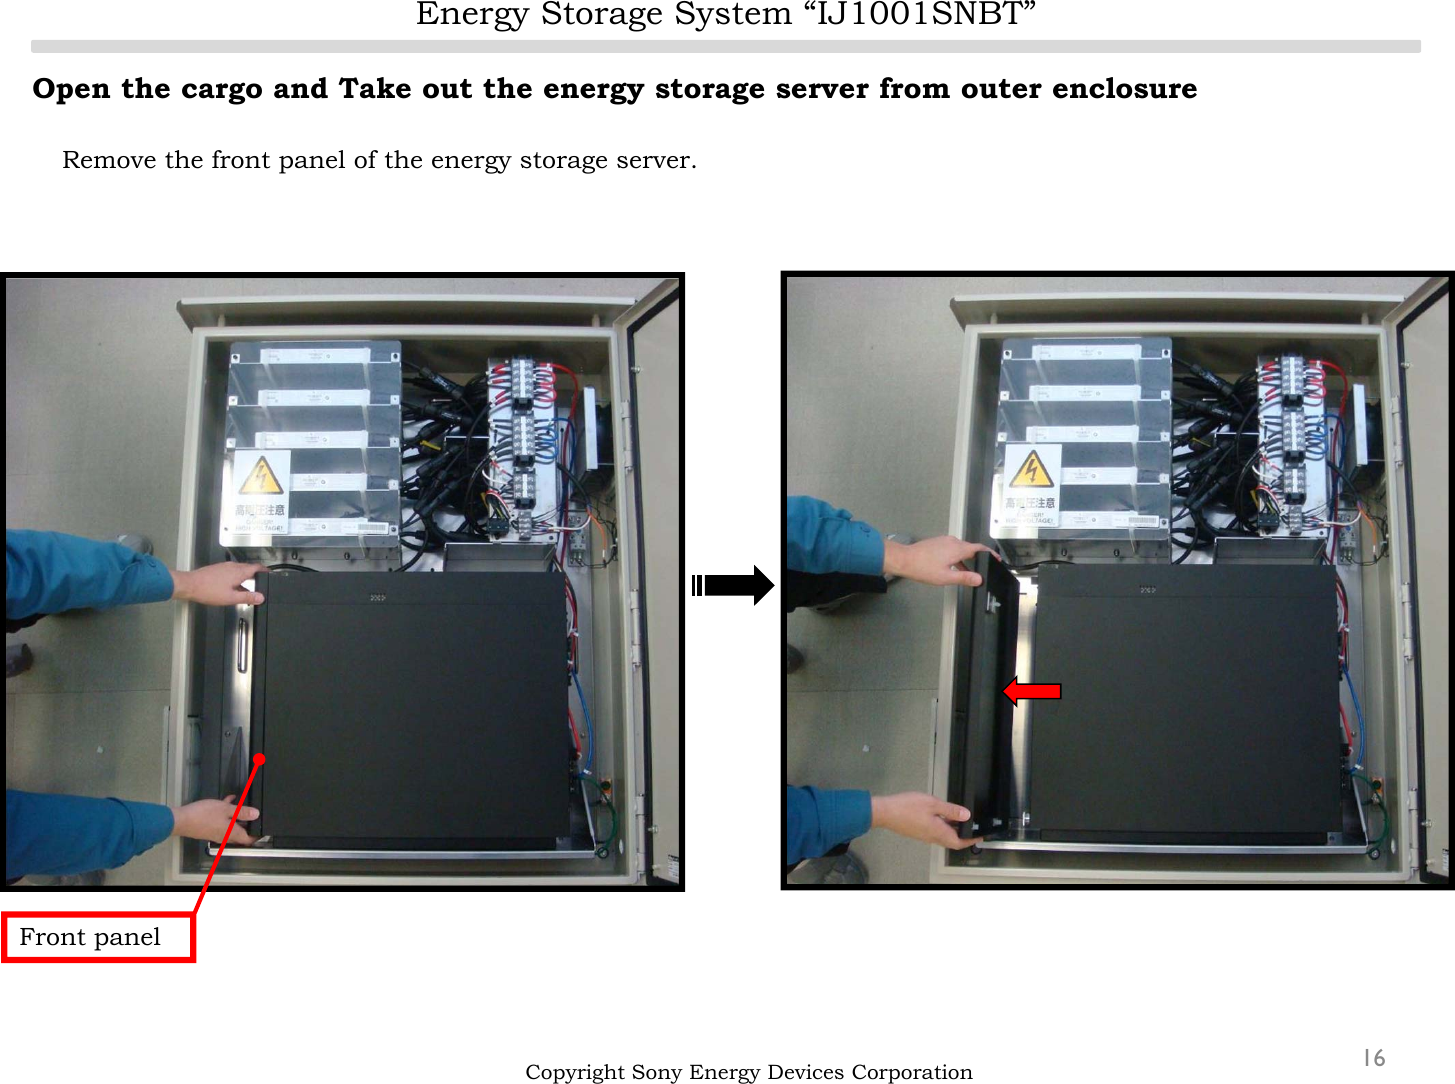 Energy Storage System “IJ1001SNBT”16Open the cargo and Take out the energy storage server from outer enclosureRemove the front panel of the energy storage server.Copyright Sony Energy Devices CorporationFront panel